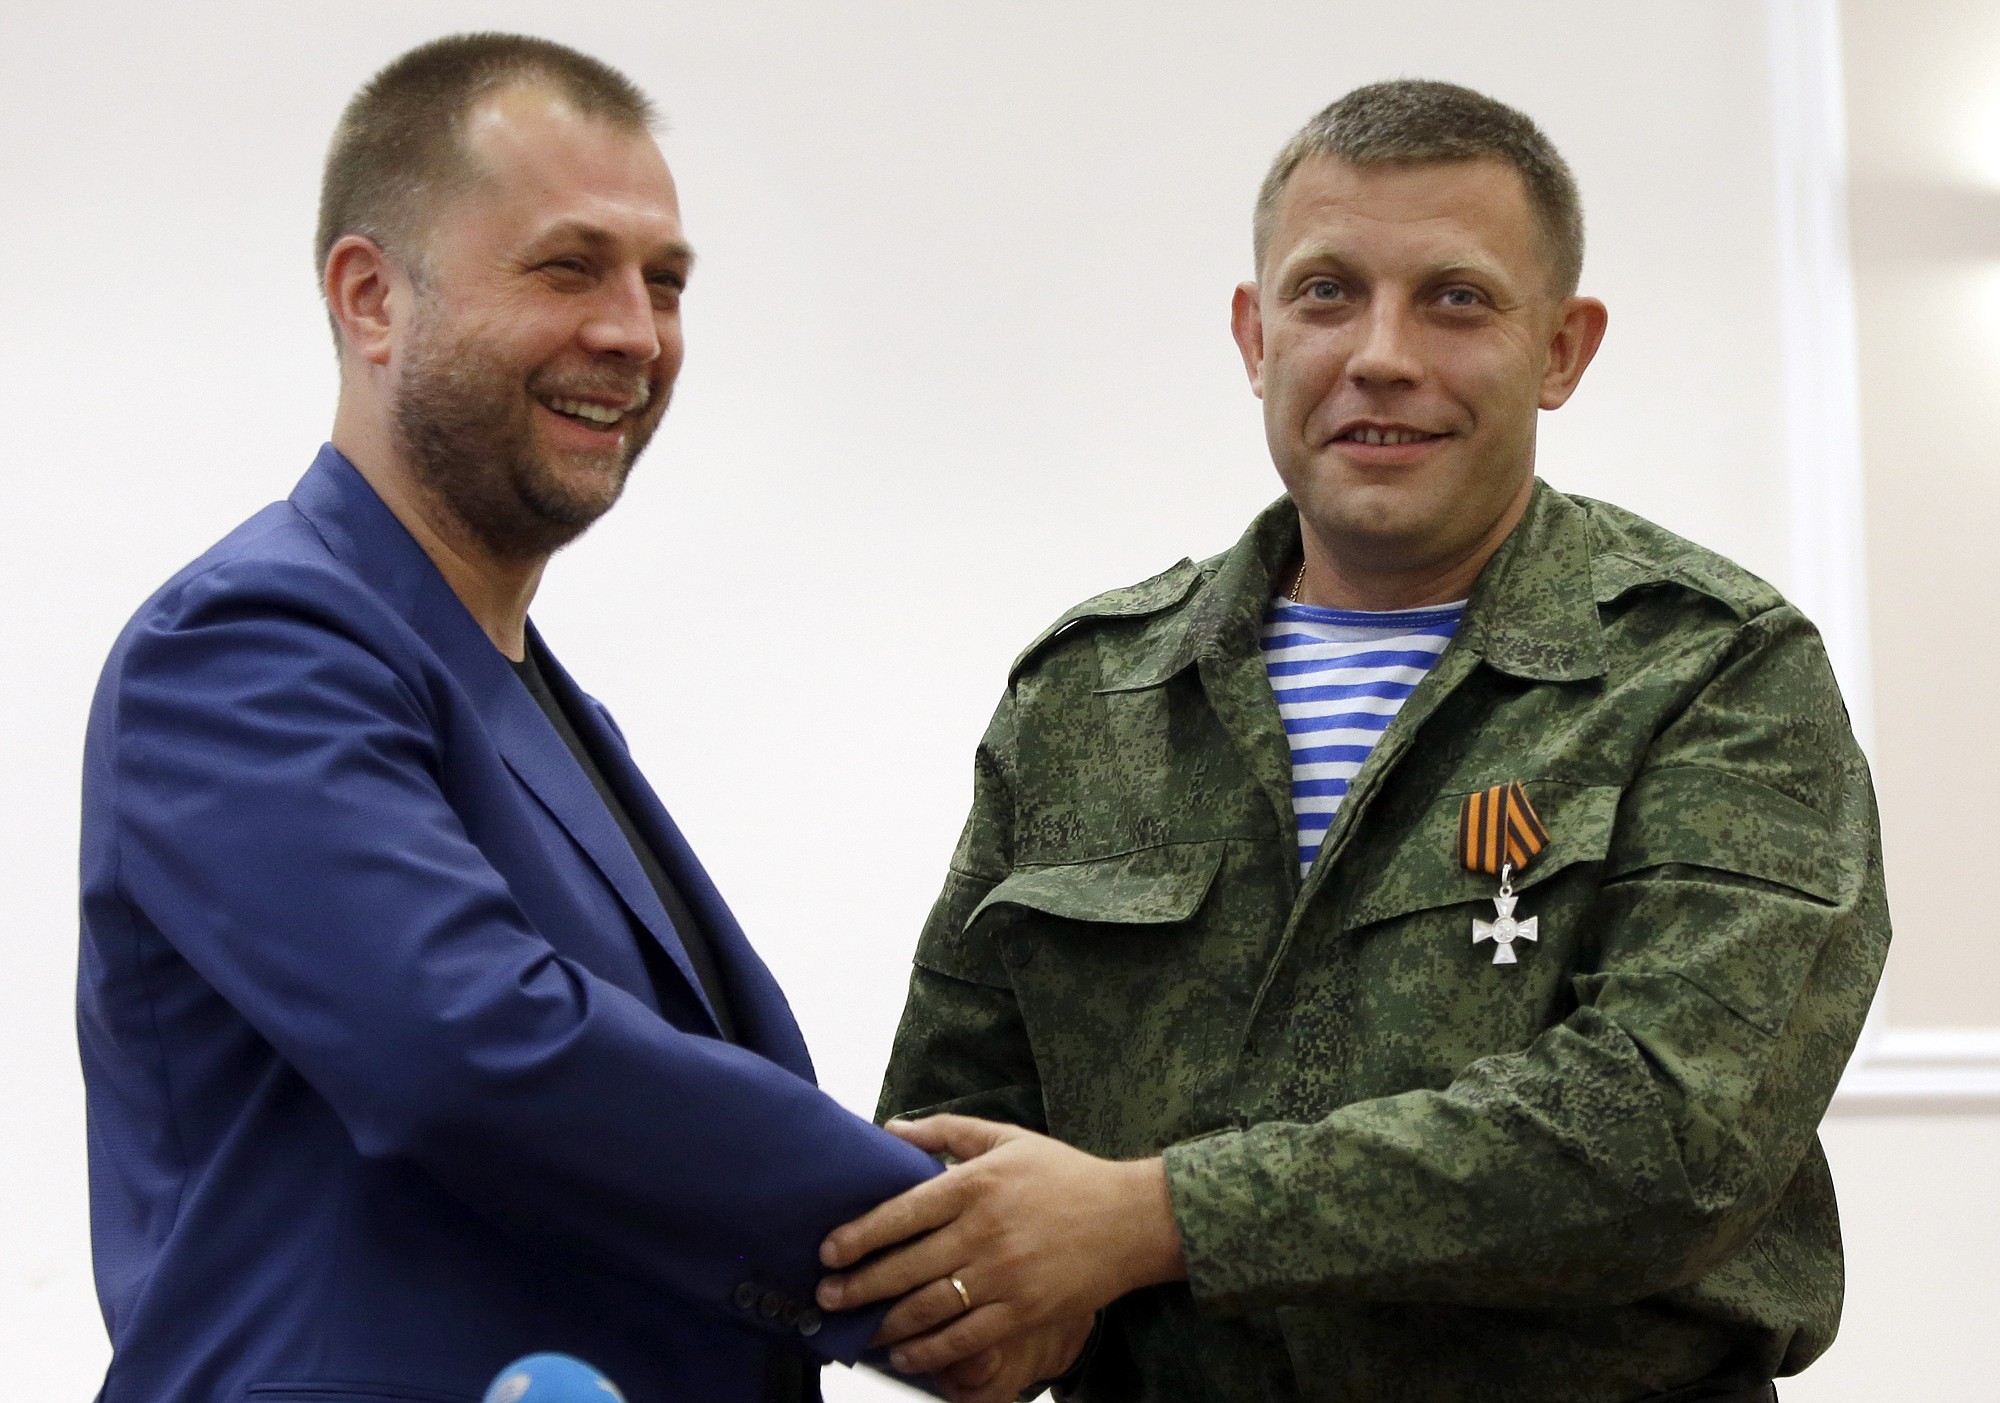 Outgoing Prime Minister Alexander Borodai, left, shakes hands with Alexander Zakharchenko, who has been put forward as the new Prime Minister of the self-declared &quot;Donetsk People?s Republic&quot;, after a press conference in Donetsk, eastern Ukraine,Thursday Aug. 7, 2014. Alexander Borodai announced he was resigning Thursday and that he would act as an adviser to Zakharchenko, once he has been confirmed by the separatist legislature.